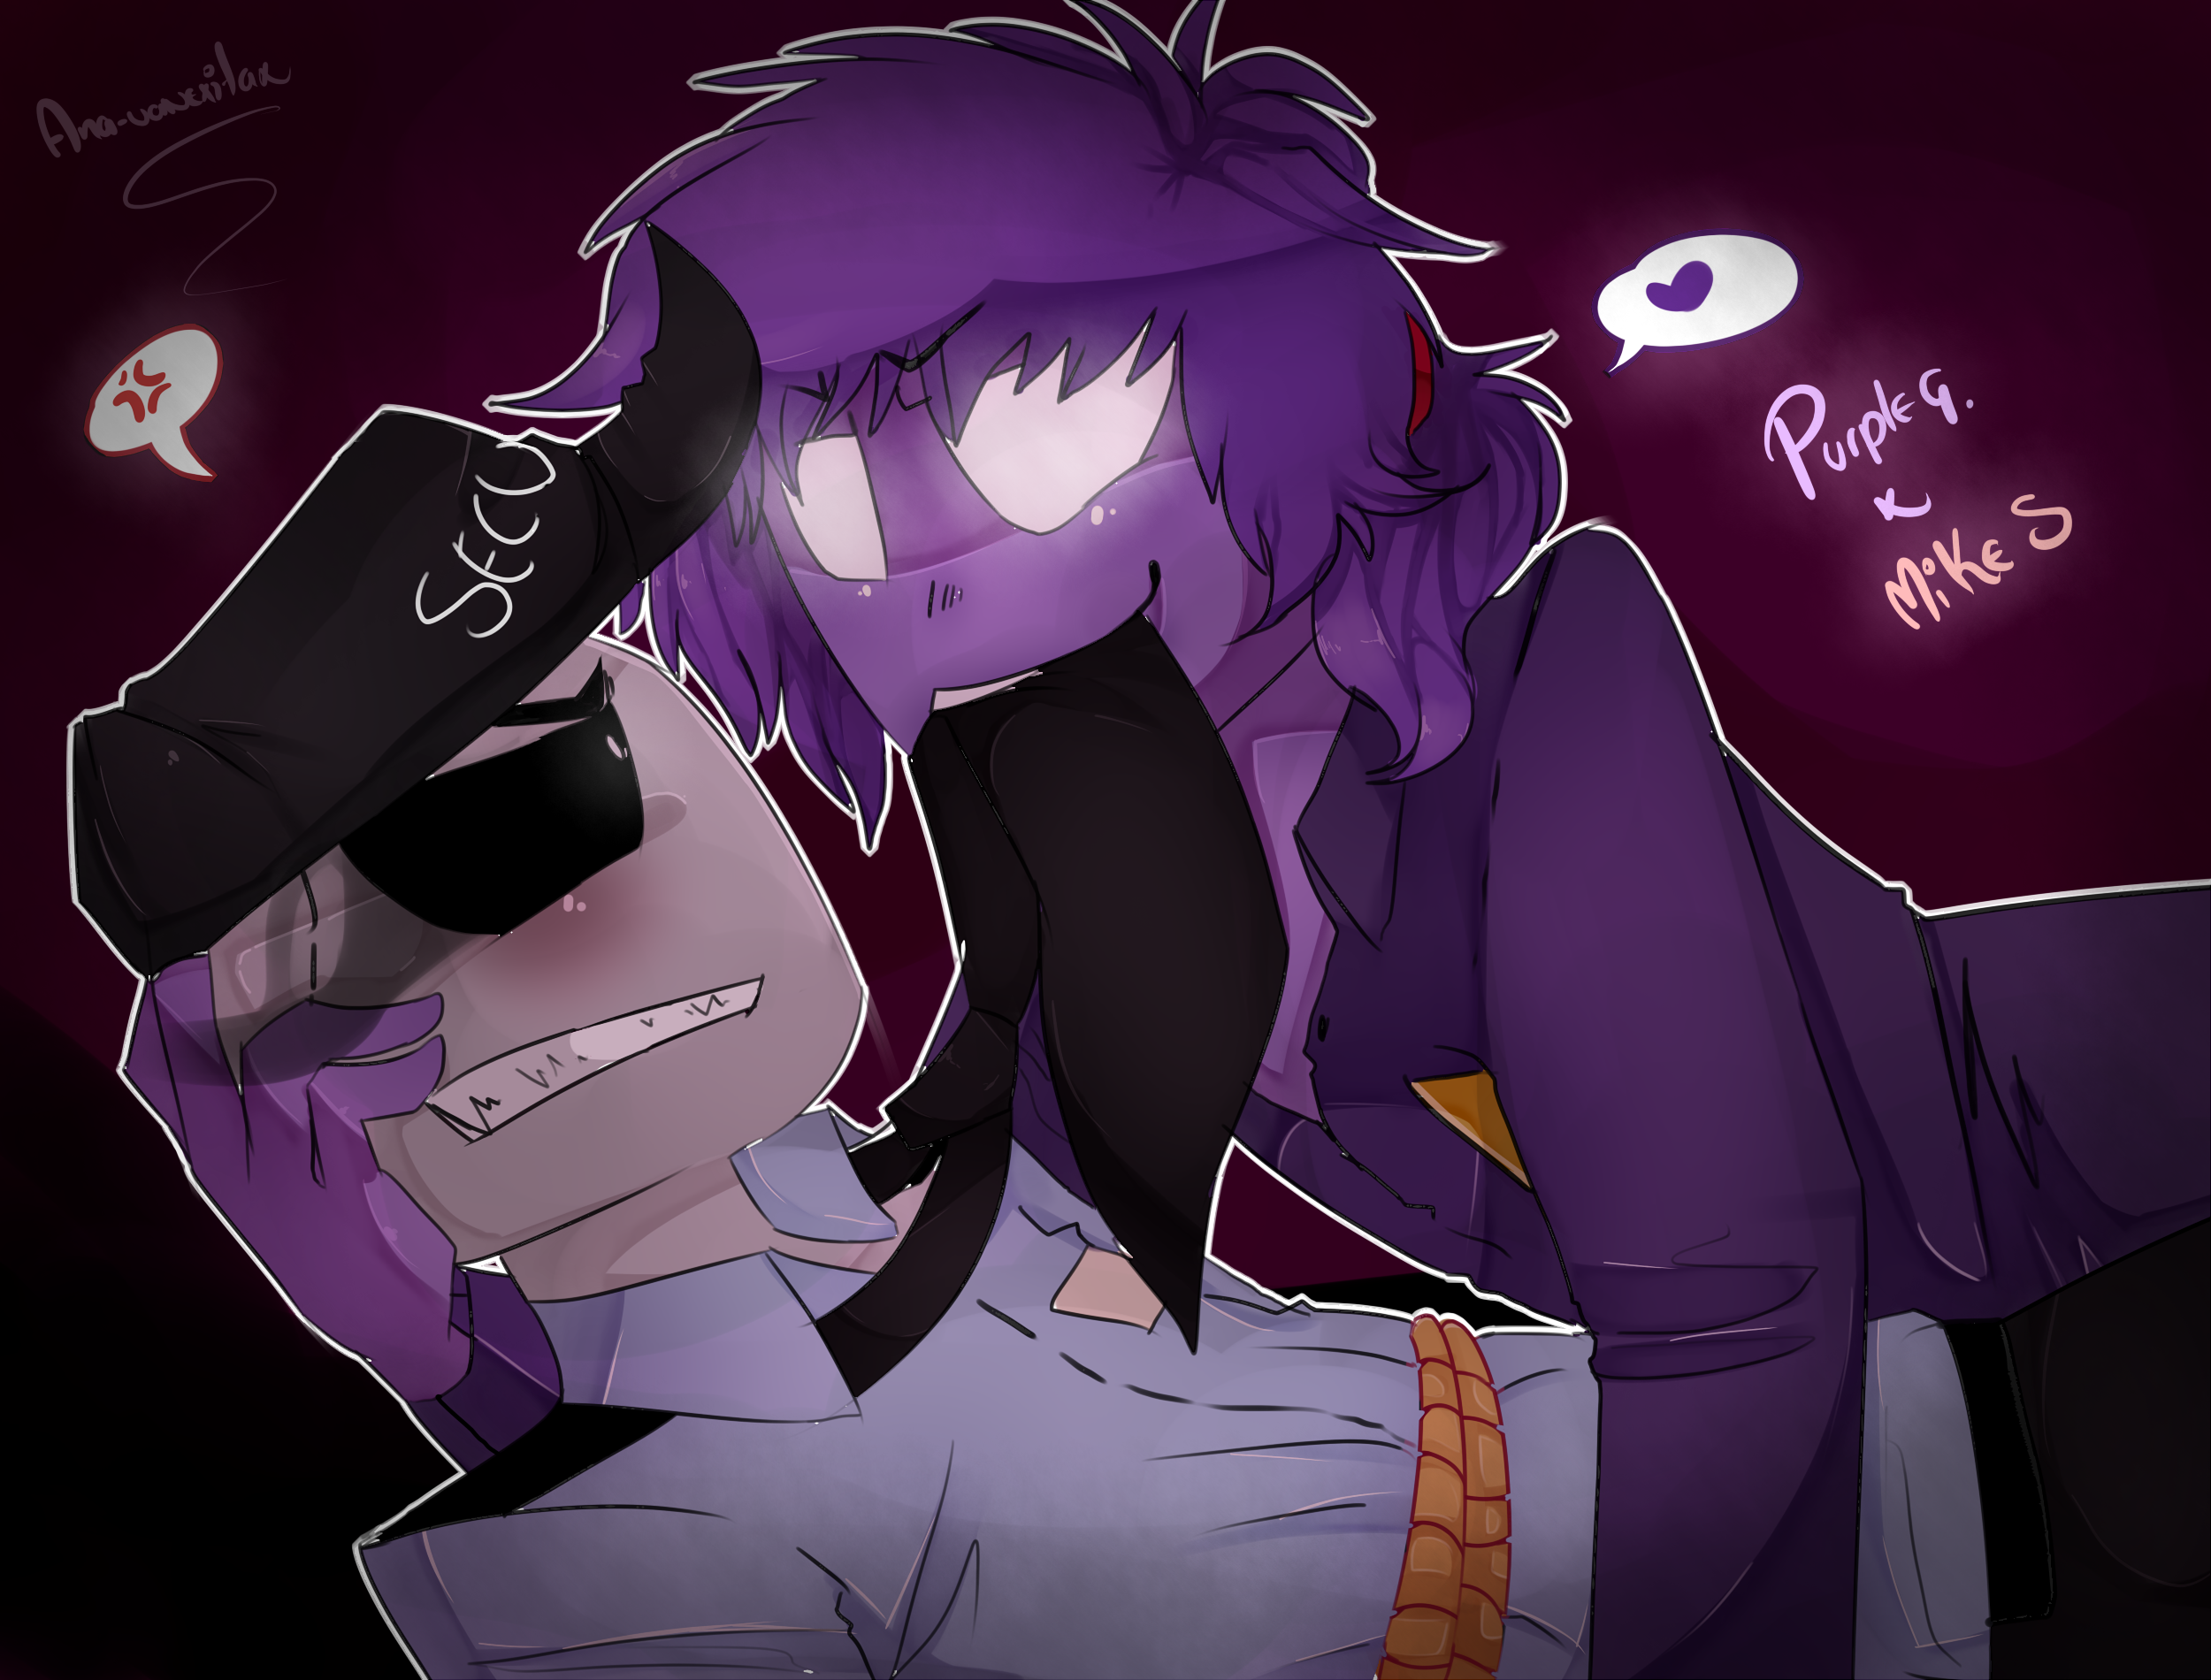 Purple Guy X Mike Favourites By Kaileighmd2001 On DeviantArt.